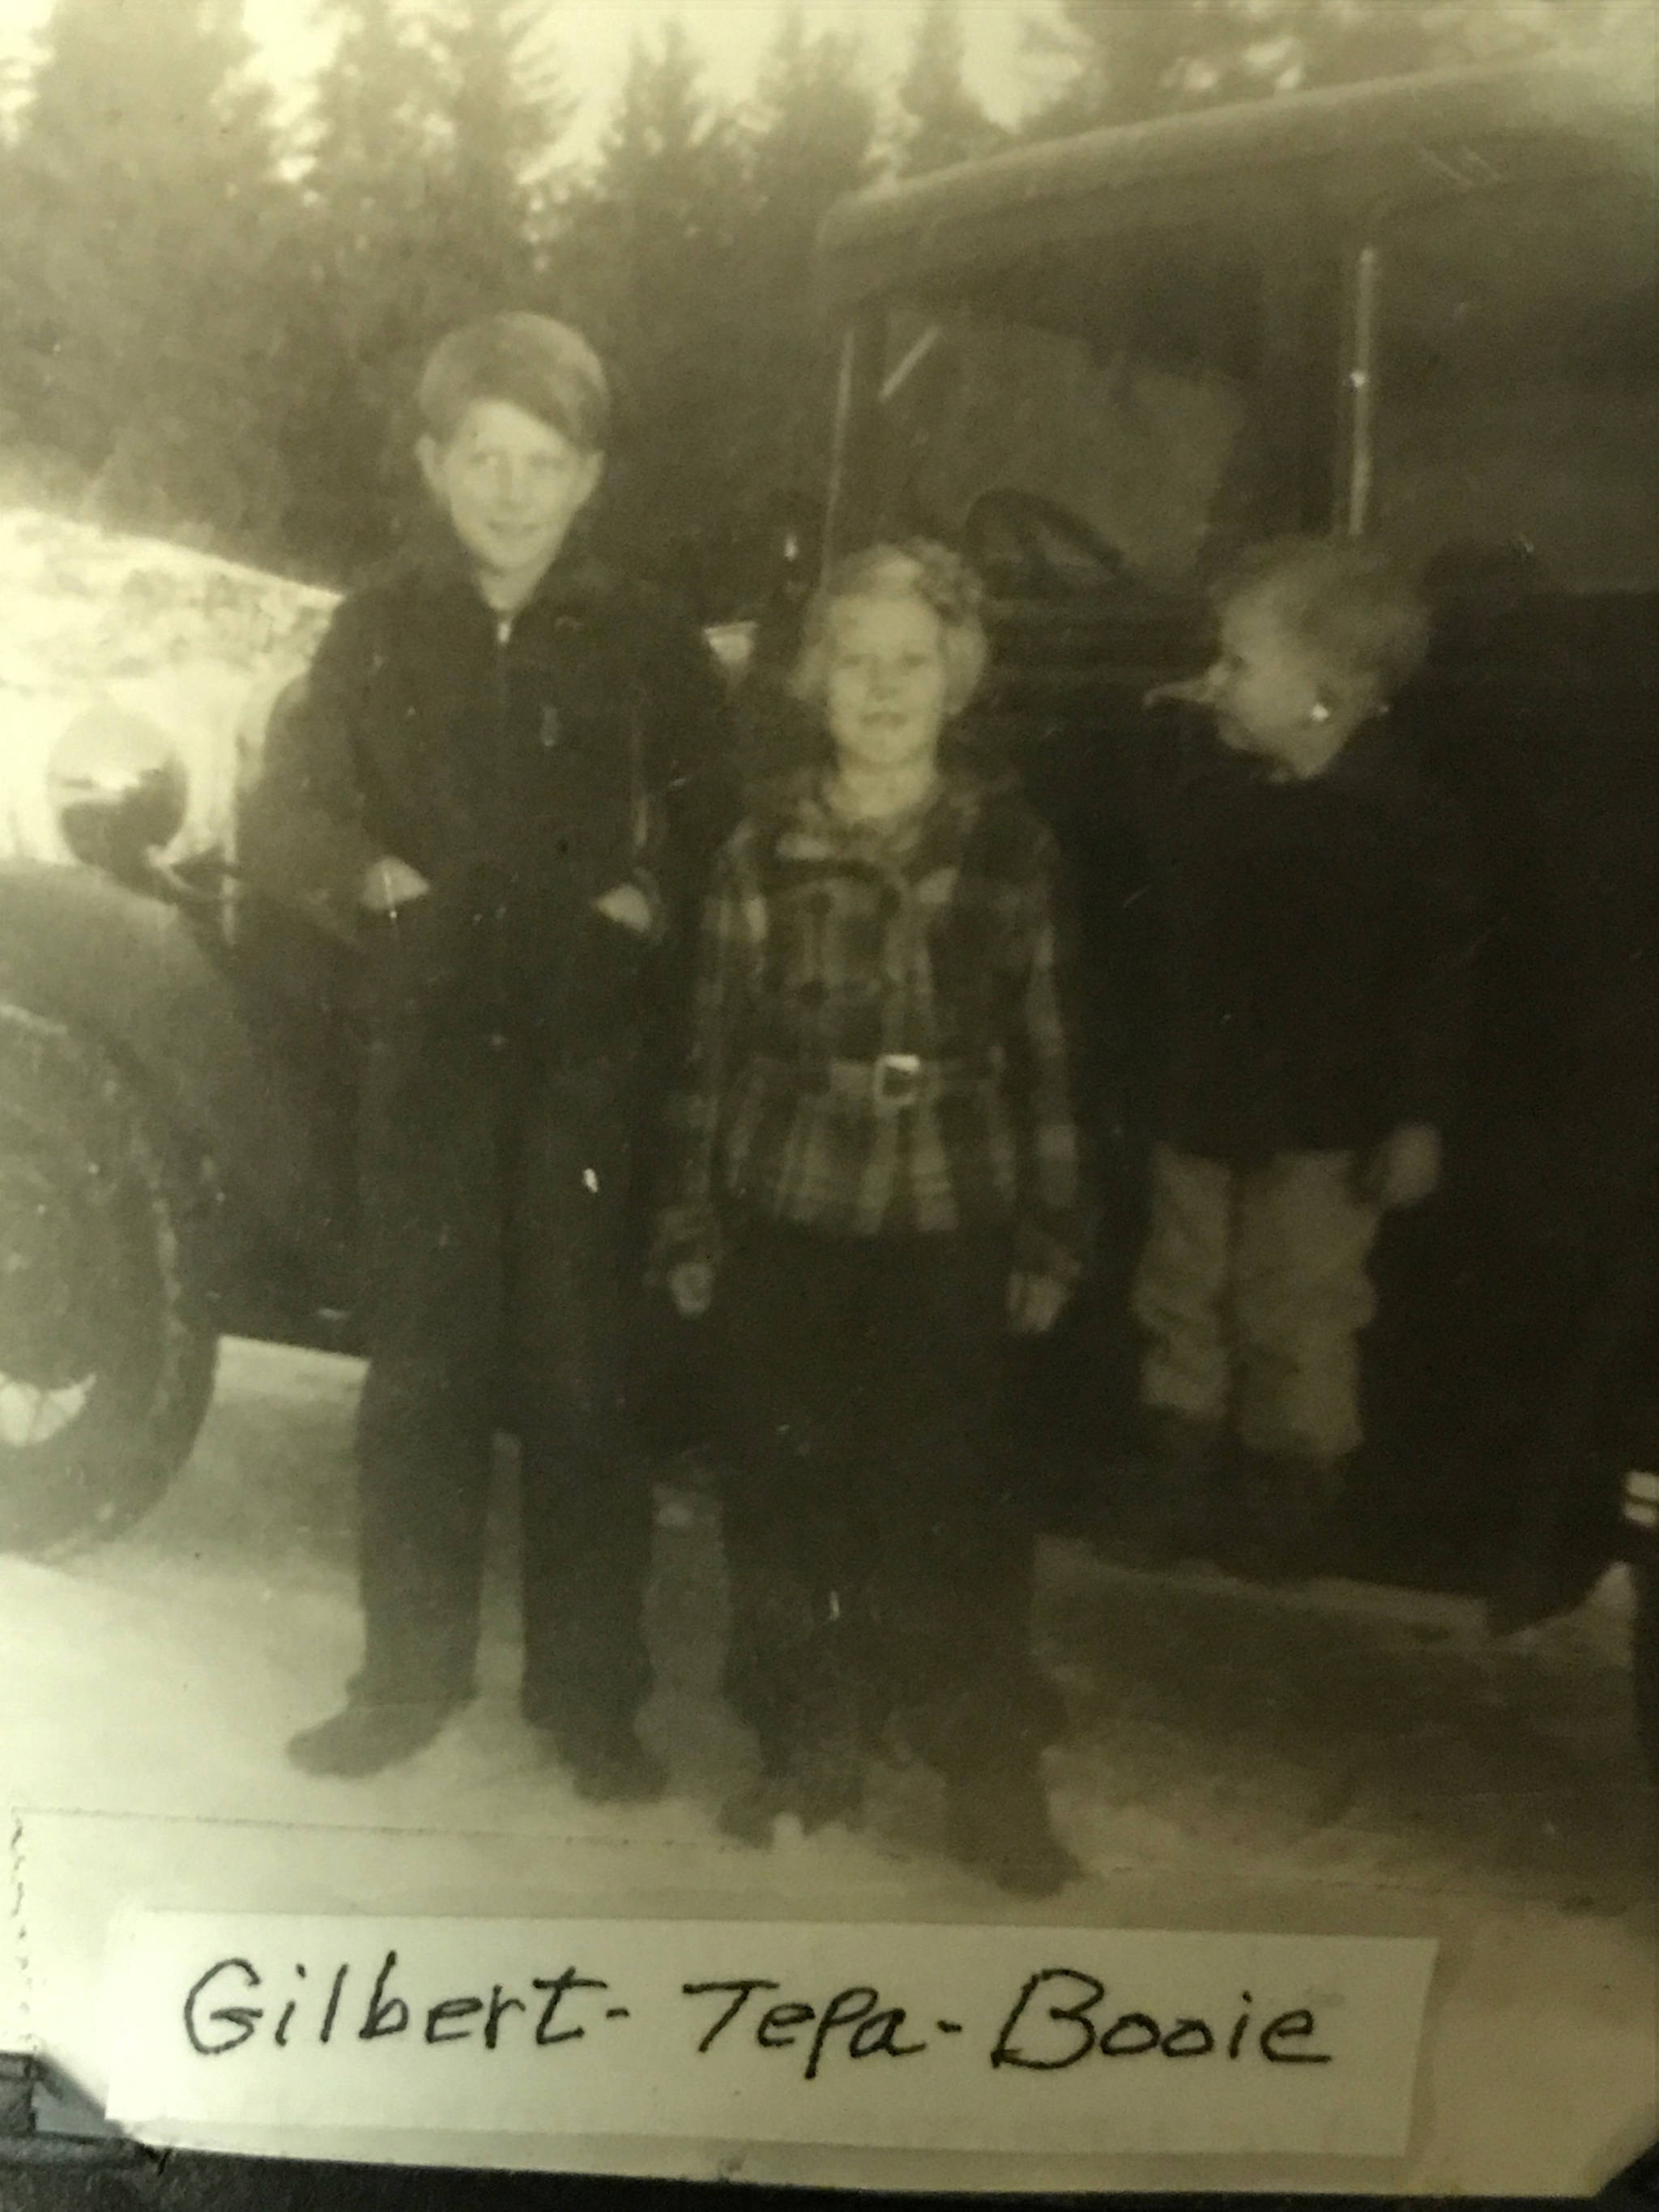 Tepa Rogers, center, as a young girl with her brothers Gilbert, left, and Booie. (Photo provided)